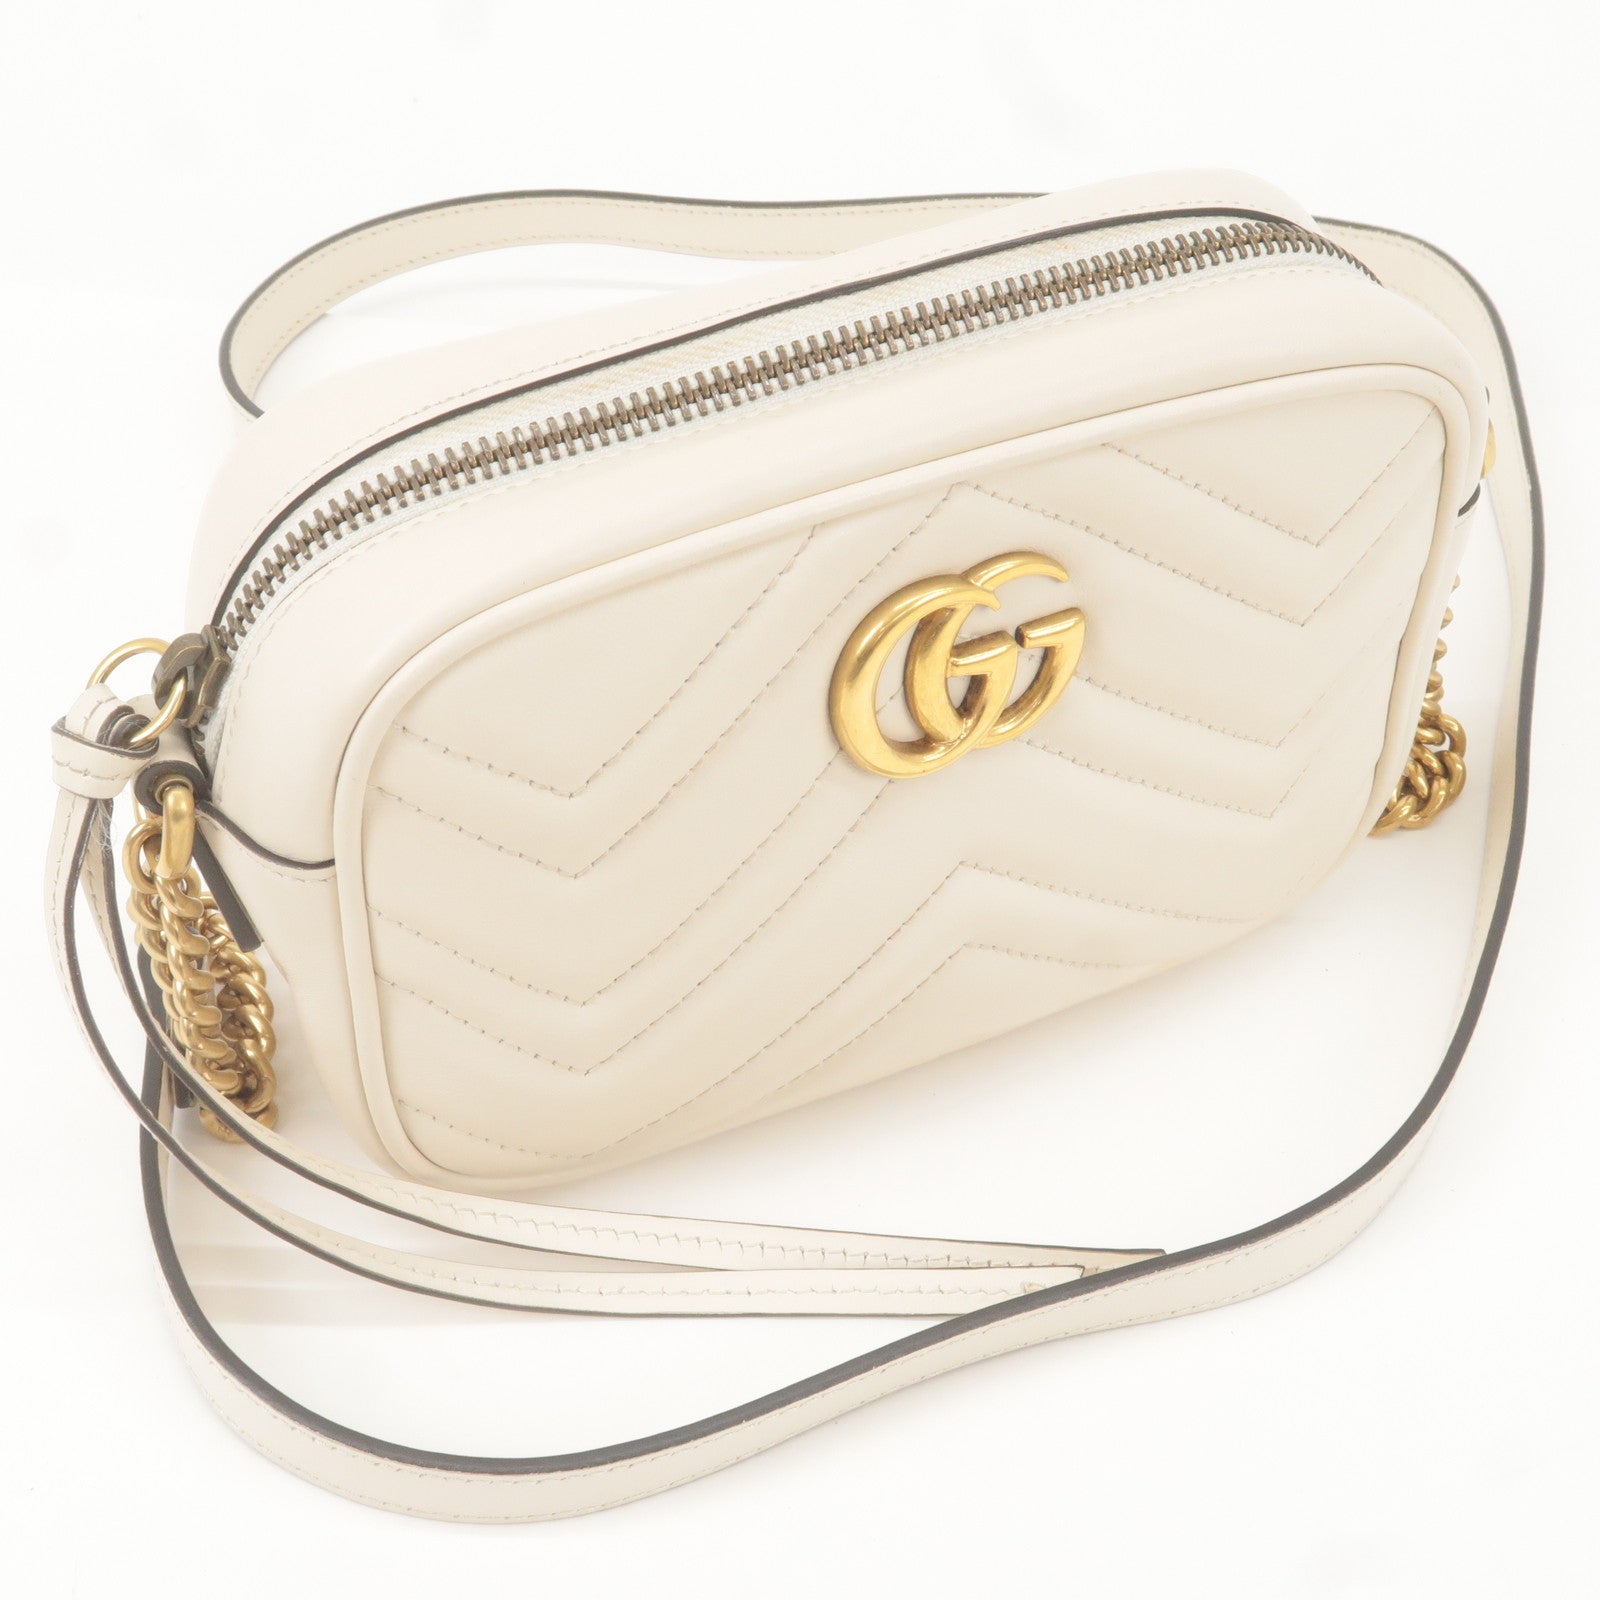 Gucci Marmont matelasse GG small ivory leather shoulder bag.